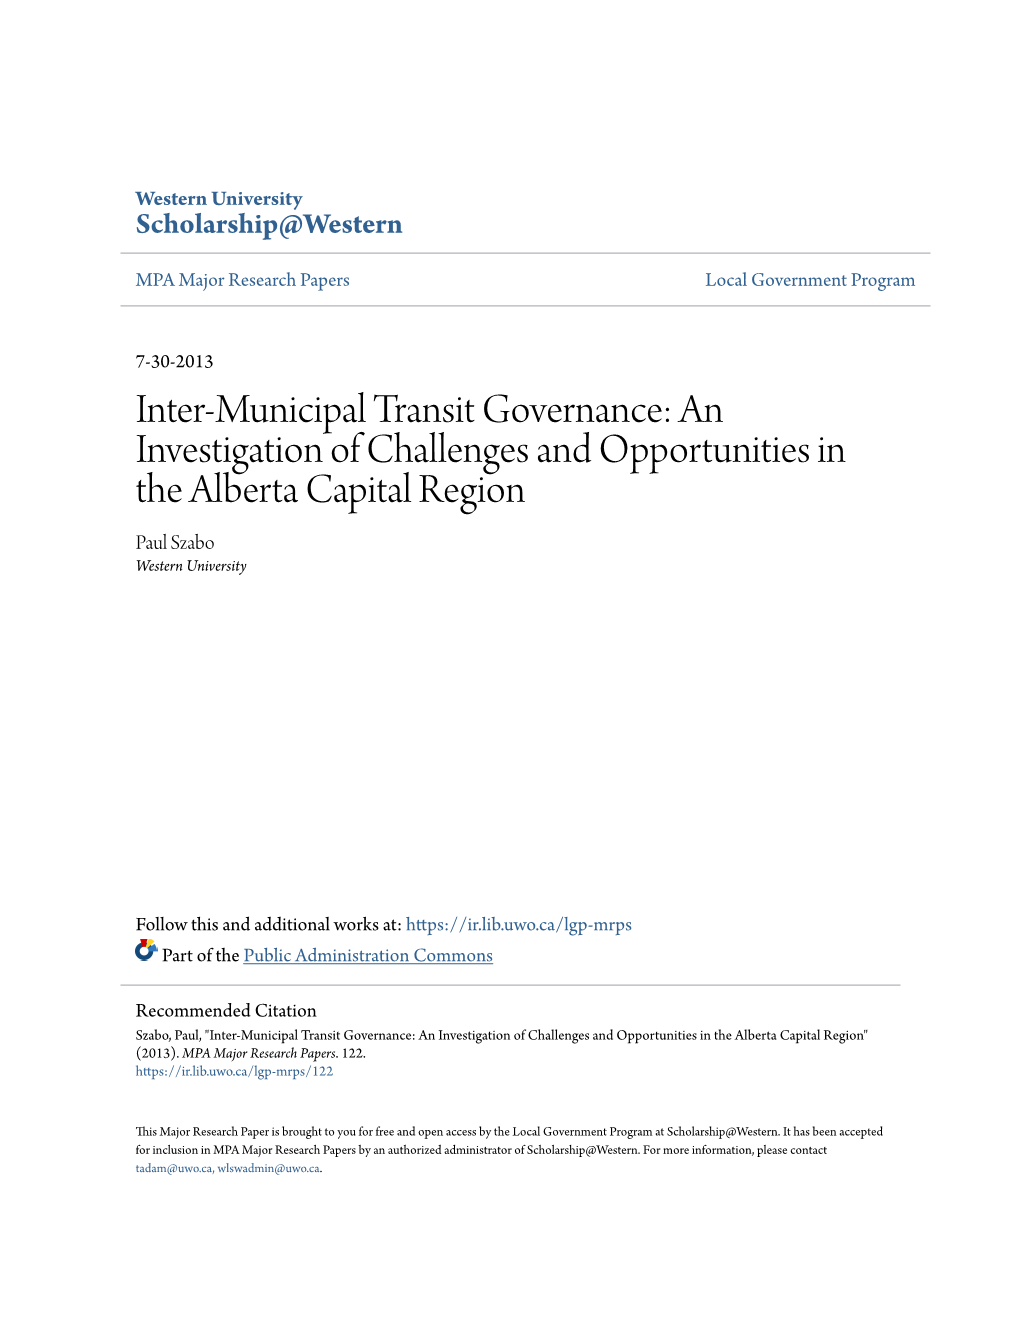 Inter-Municipal Transit Governance: an Investigation of Challenges and Opportunities in the Alberta Capital Region Paul Szabo Western University